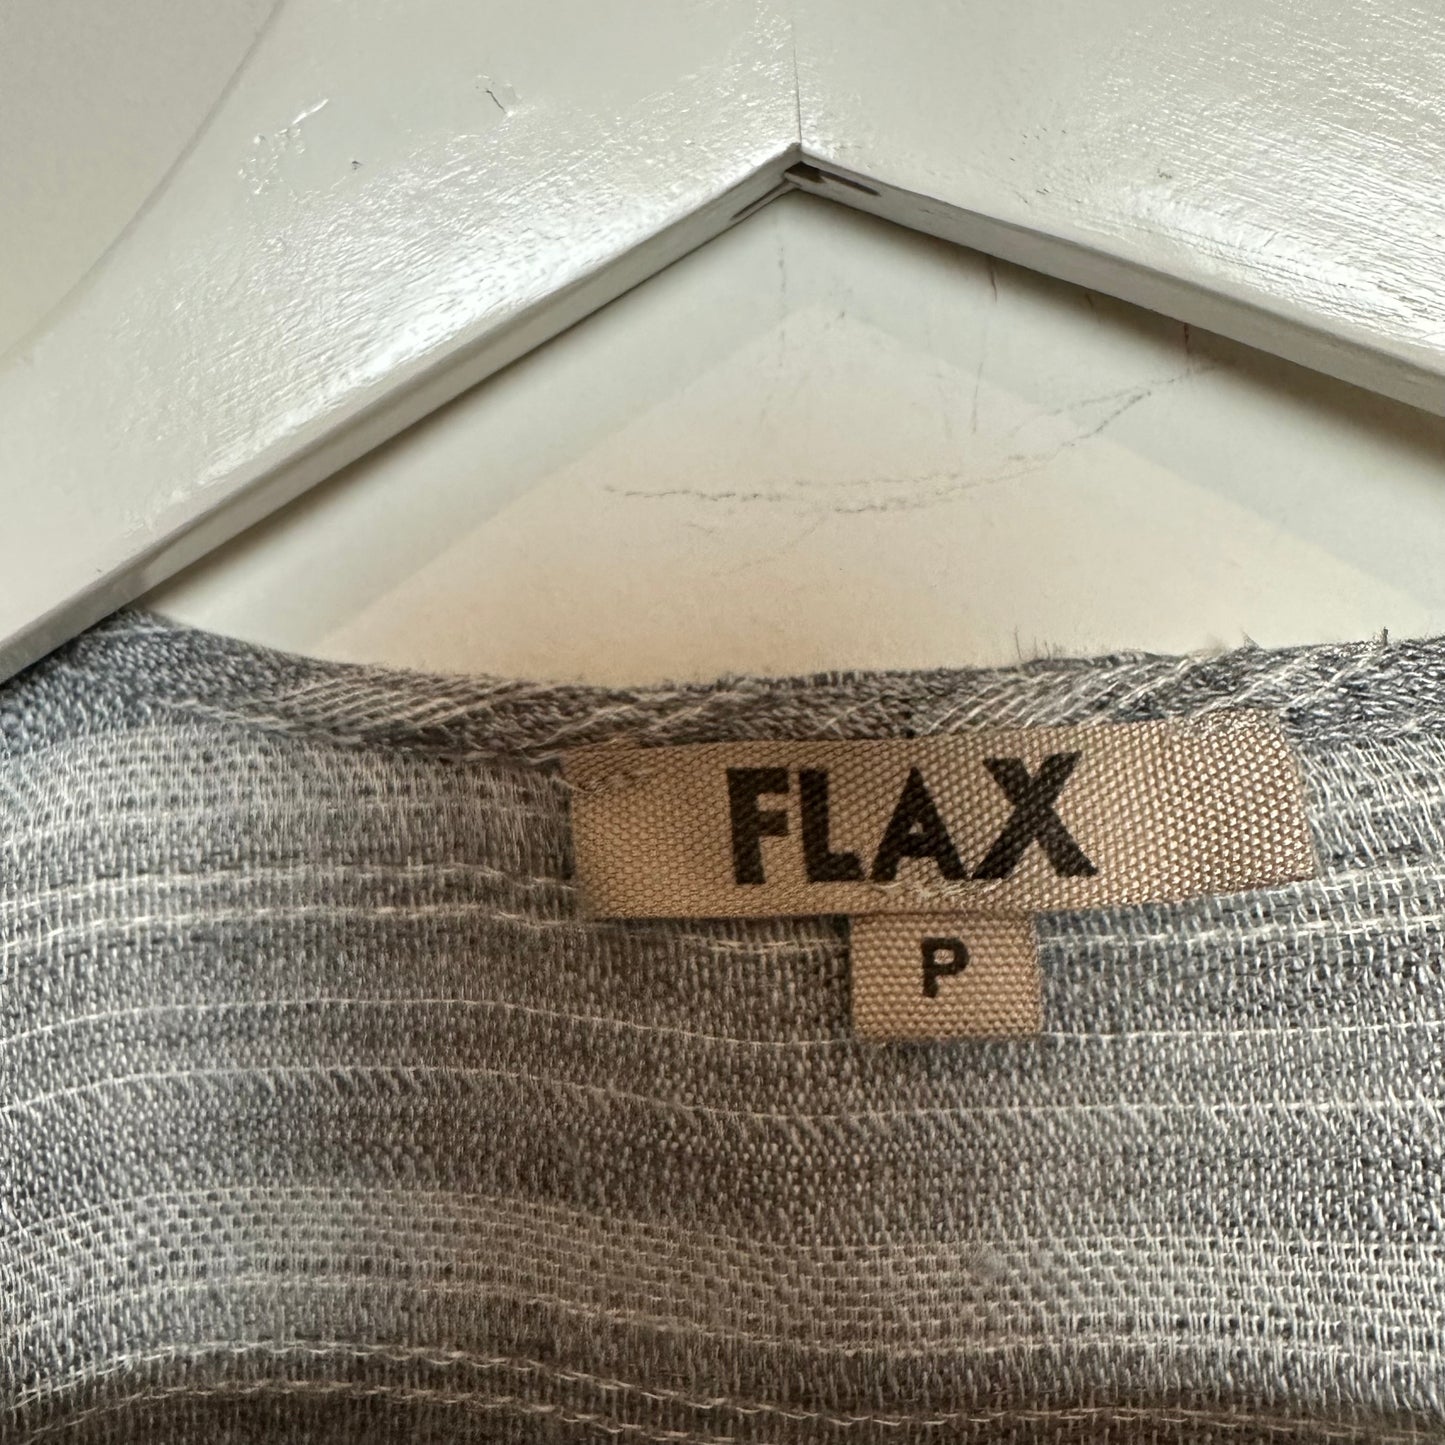 Flax 100% linen Top Striped Gray Long Sleeve Small Petite